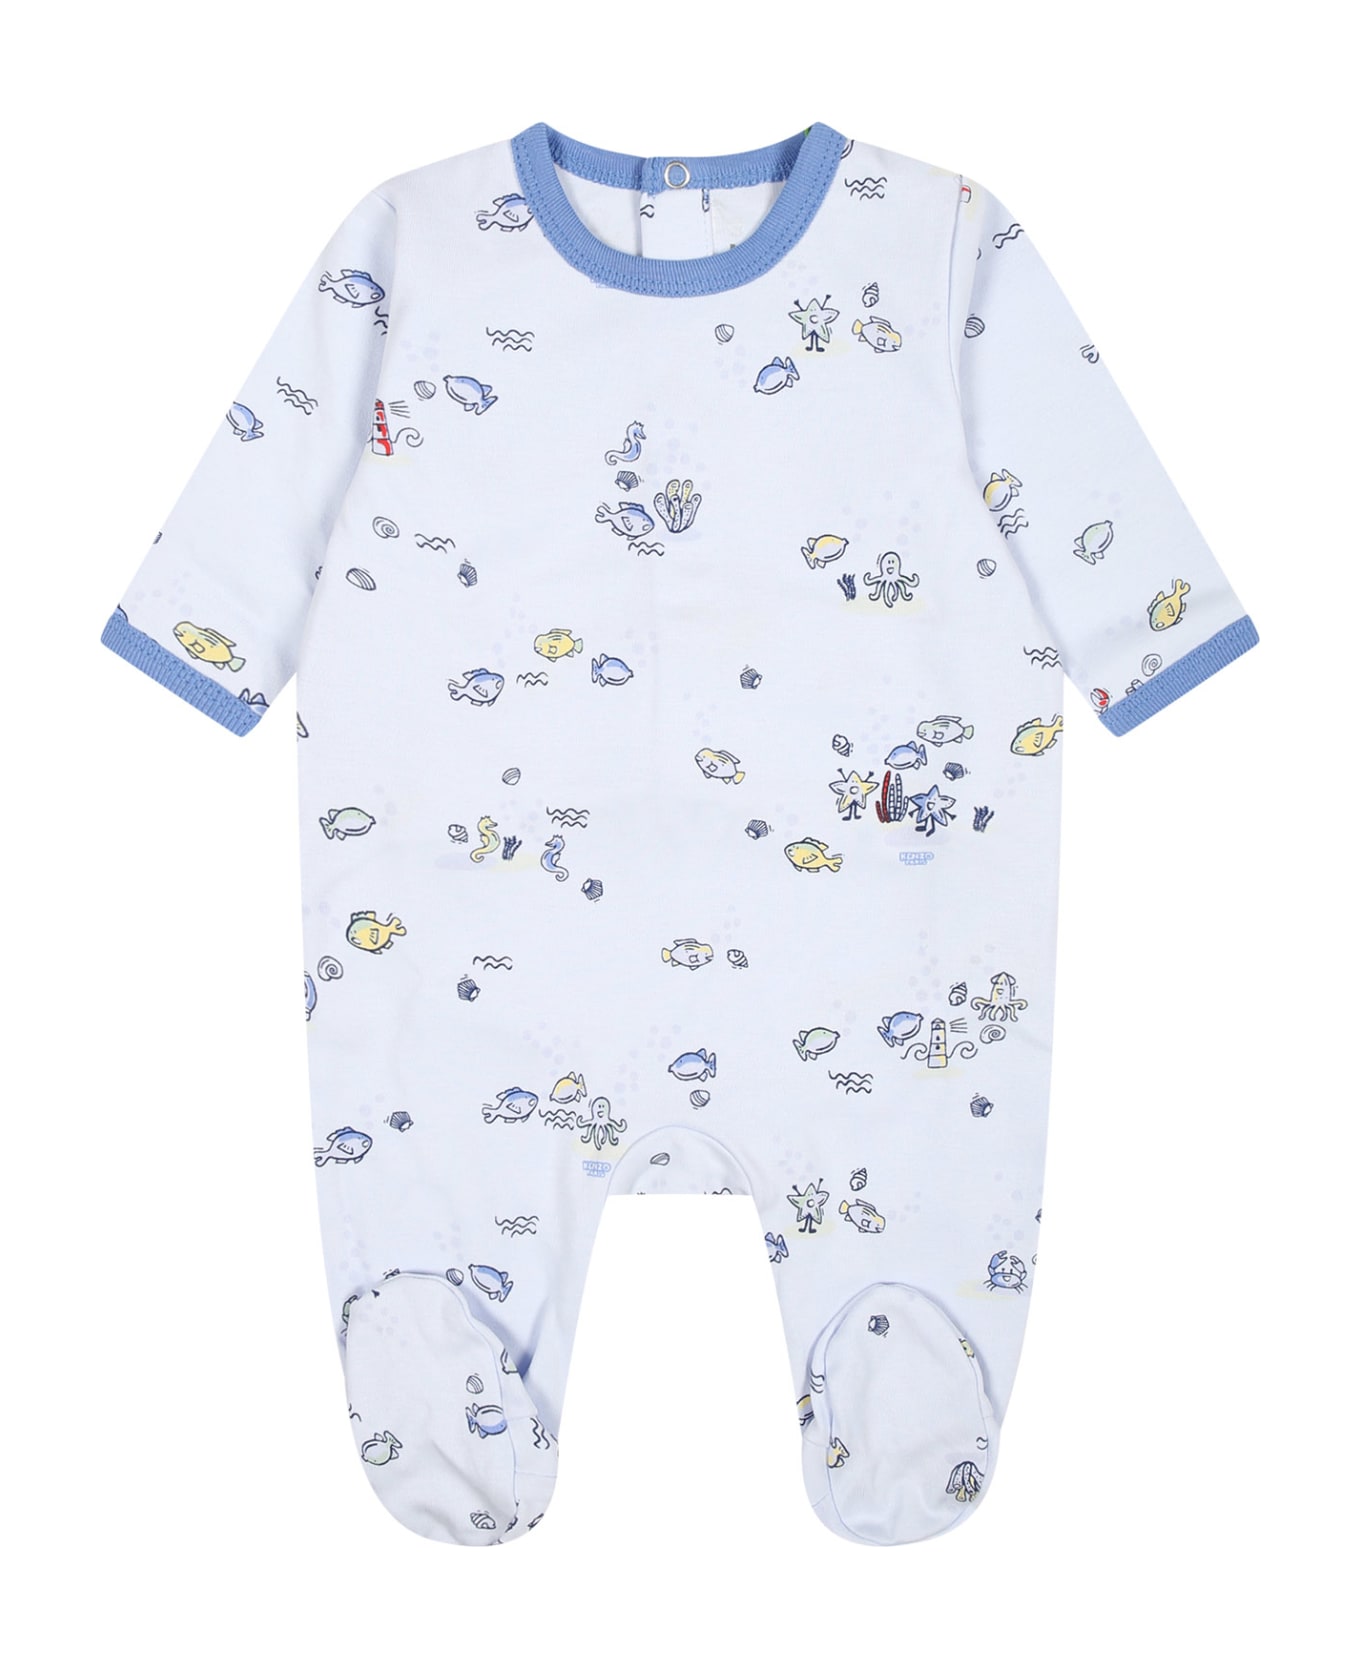 Kenzo Kids Light Blue Set For Baby Boy With Print And Logo - Light Blue